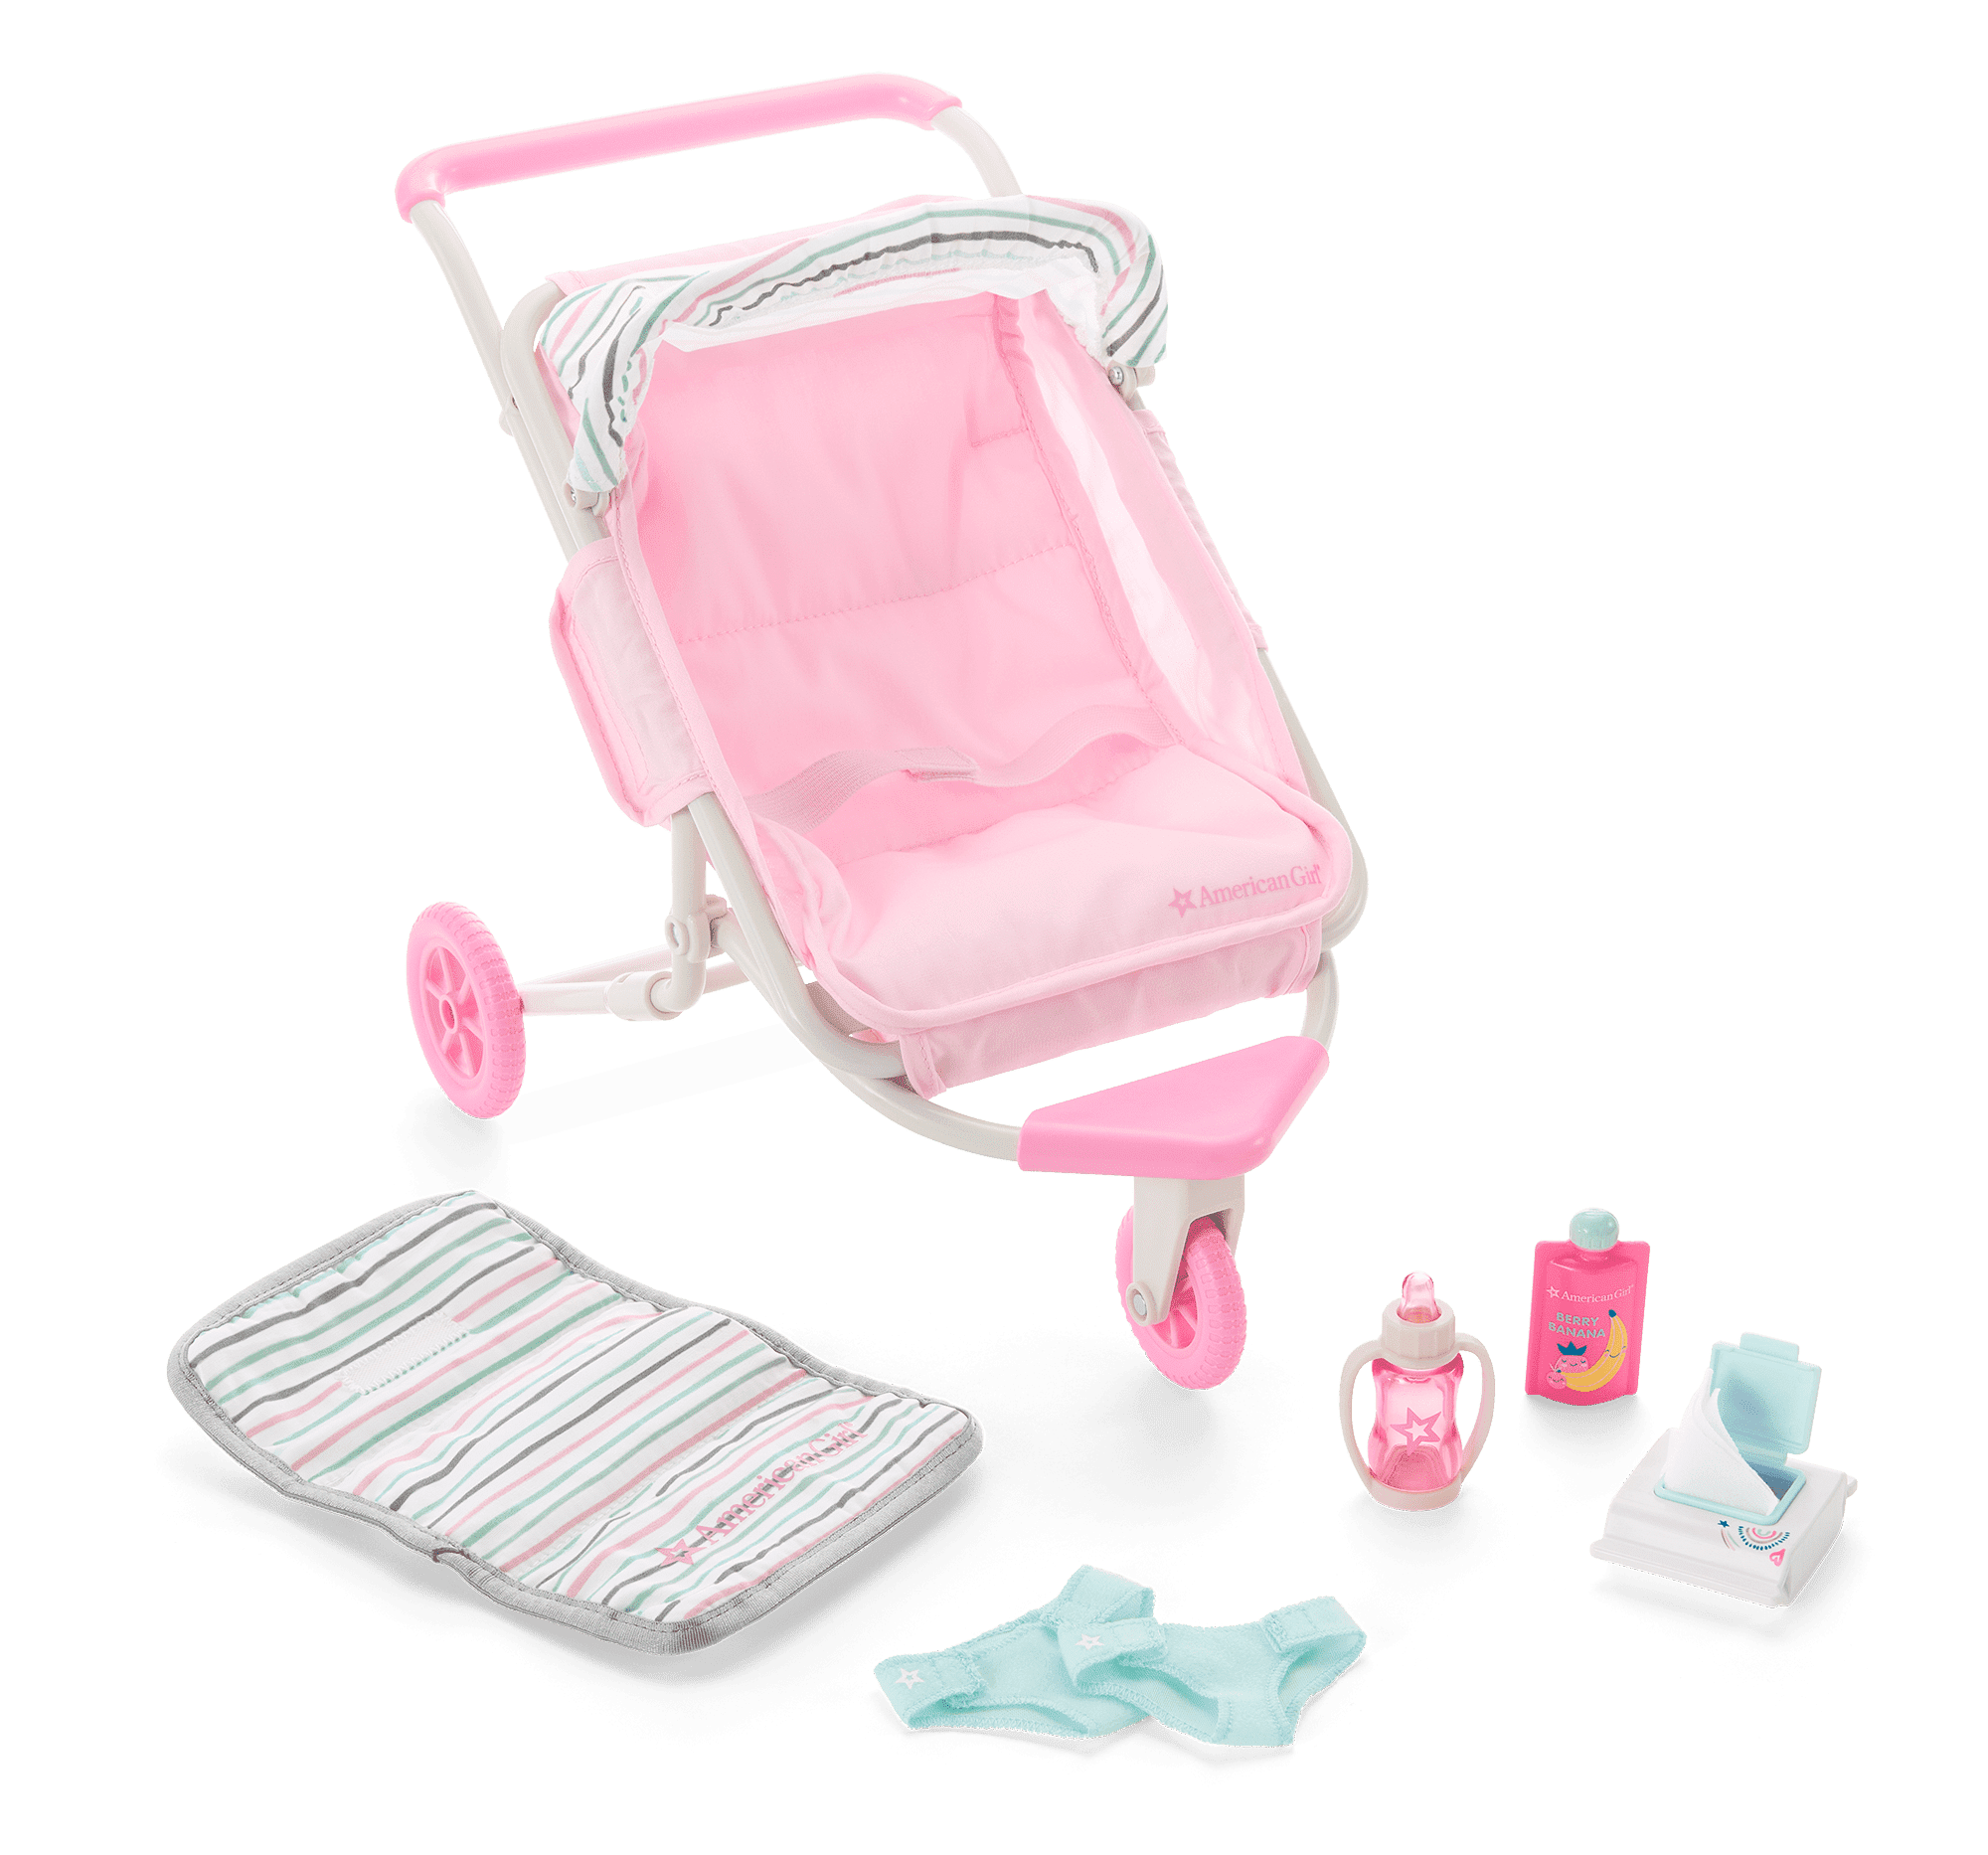 Little Bitty Baby™ Double Stroller Set for 7.75-inch Dolls